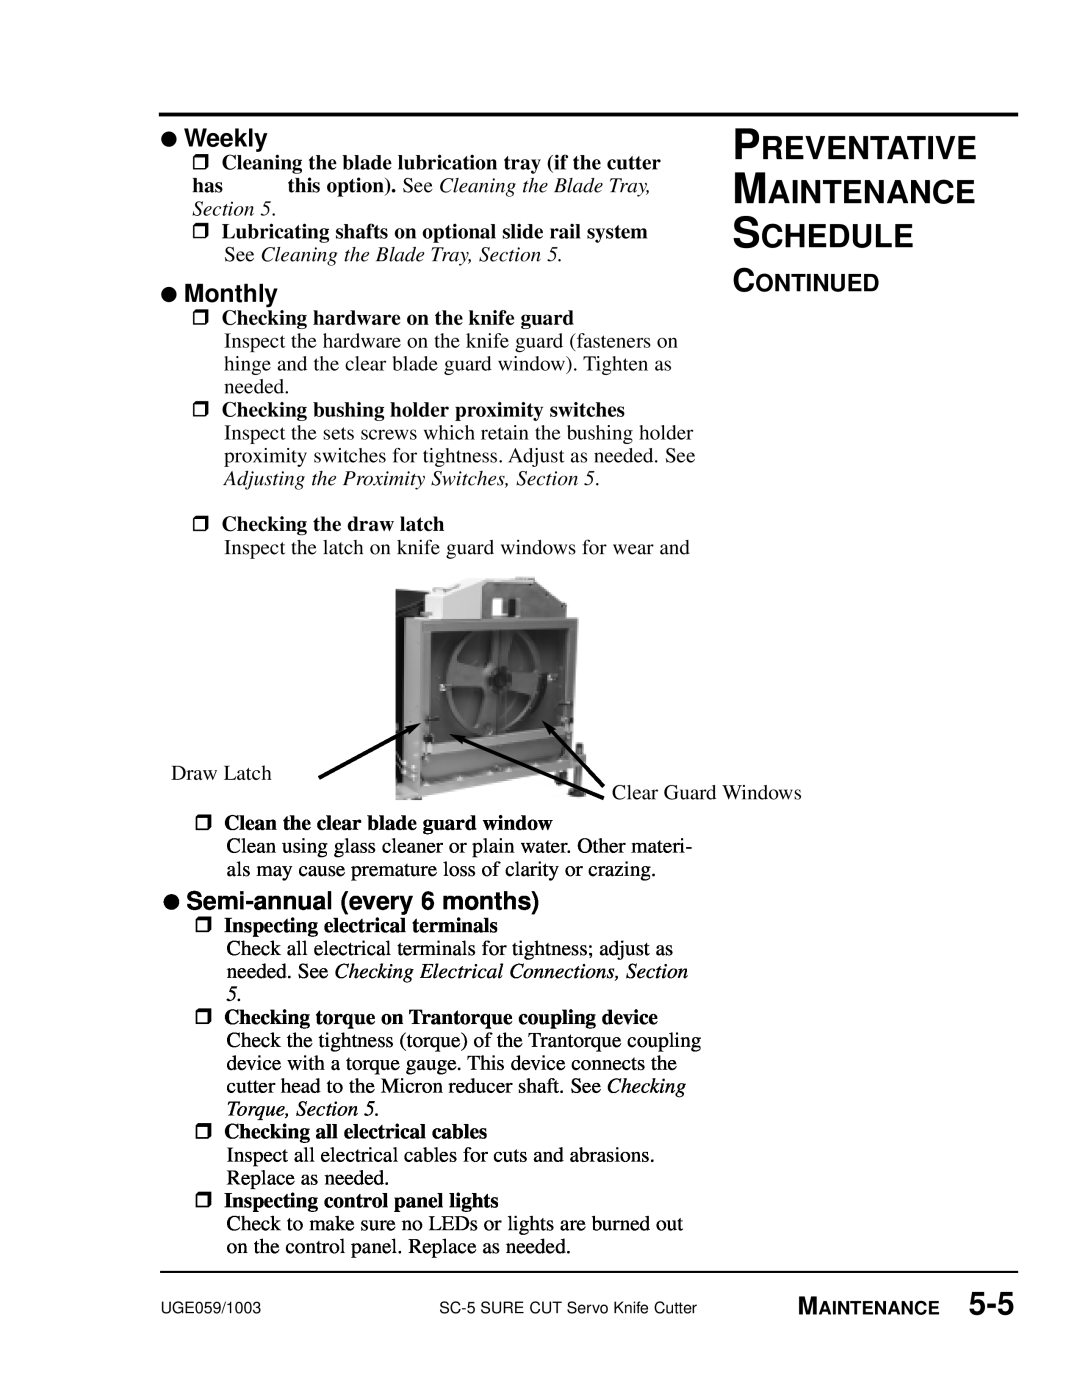 Conair SC-5 manual Weekly, Monthly, Semi-annual every 6 months, Cleaning the blade lubrication tray if the cutter, Section 